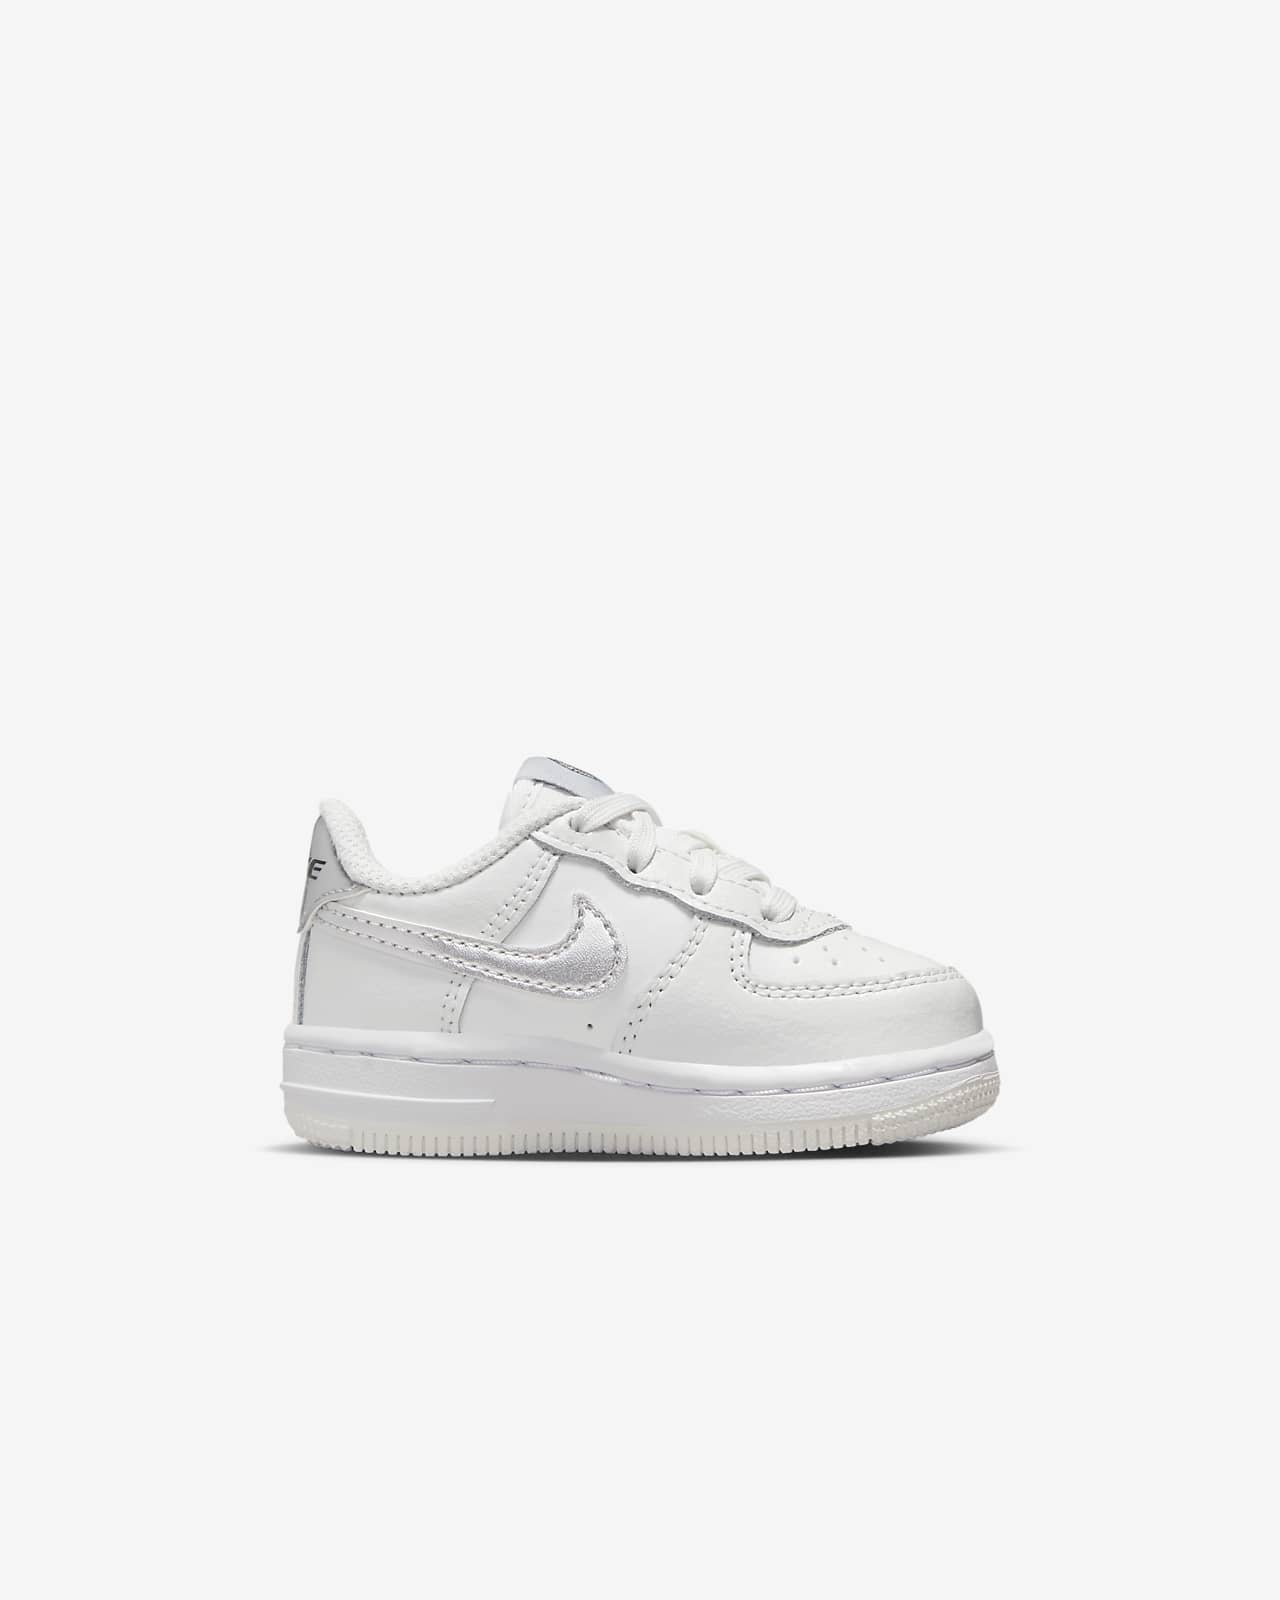 Nike Force 1 Low SE Baby/Toddler Shoes.